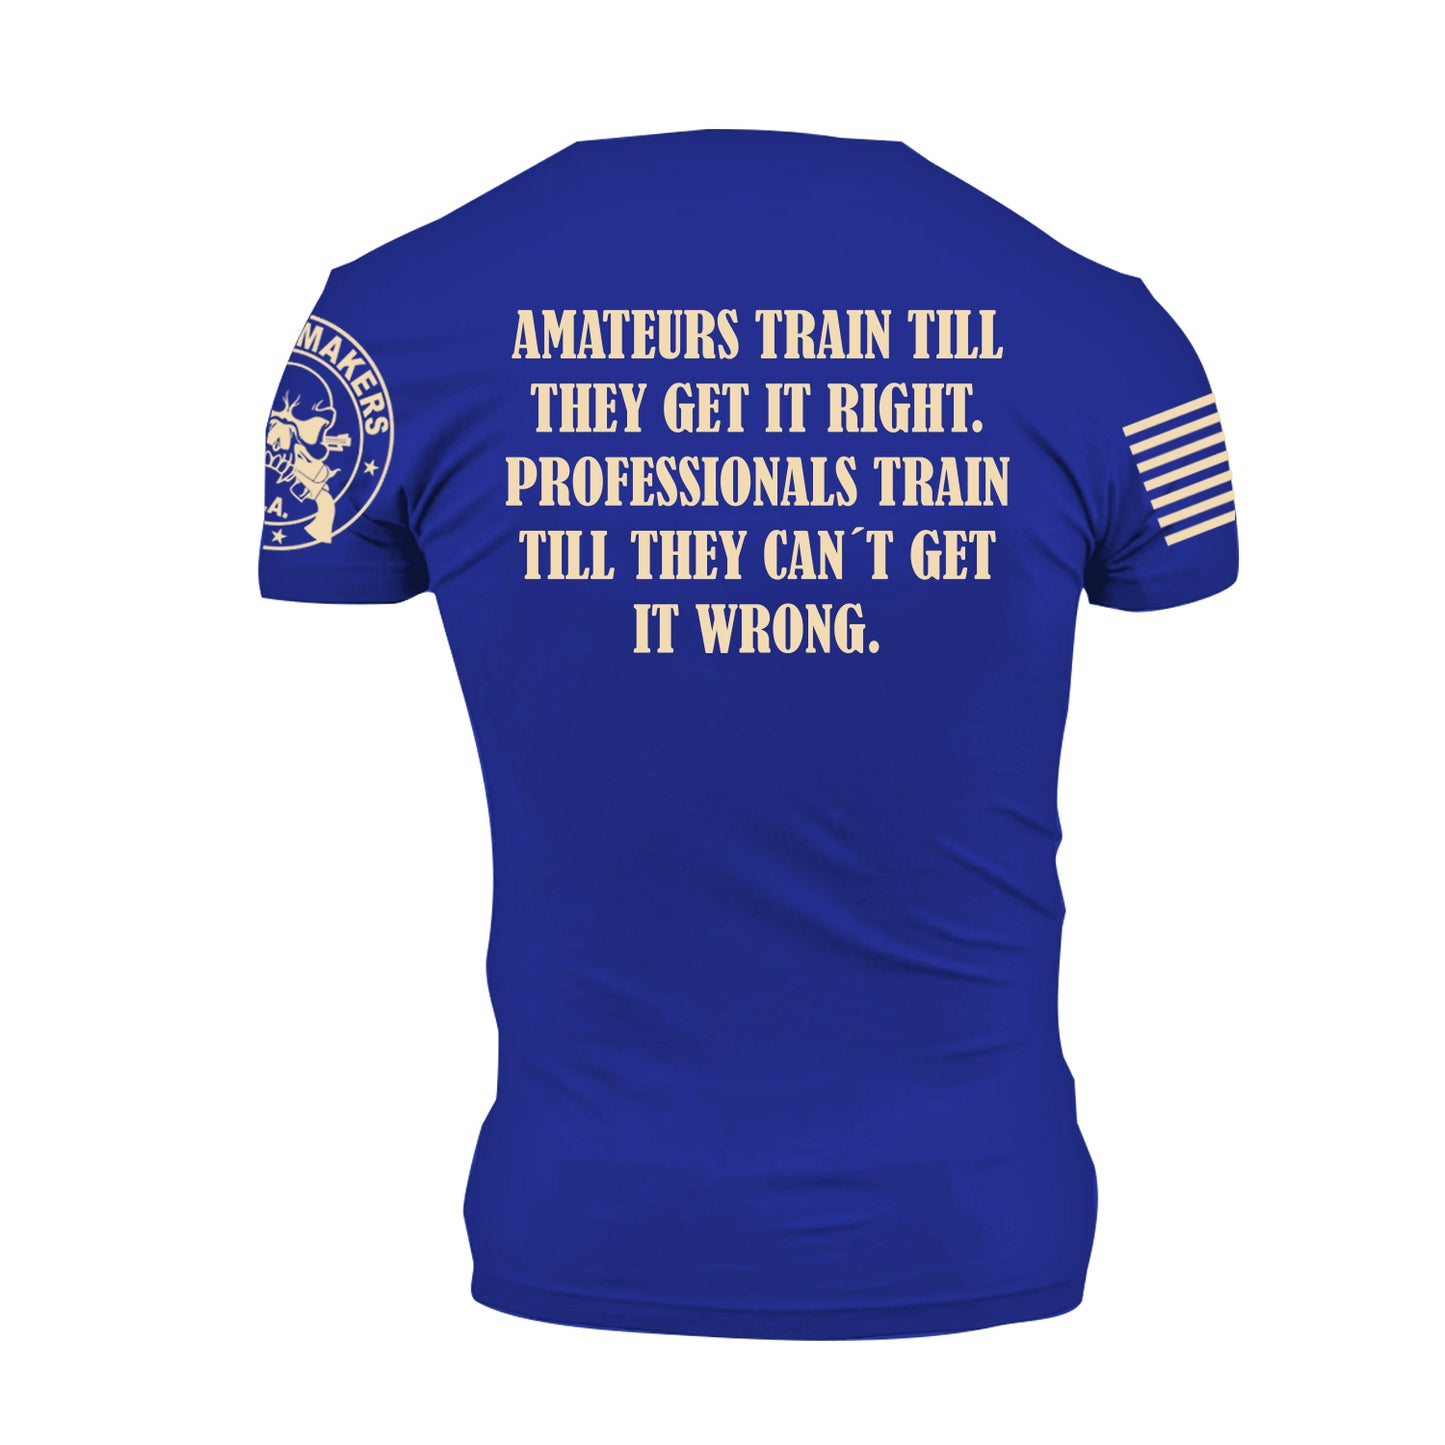 "COME AND TAKE IT" Authentic Military-Inspired T-Shirts by US Veterans - (Royal Blue)